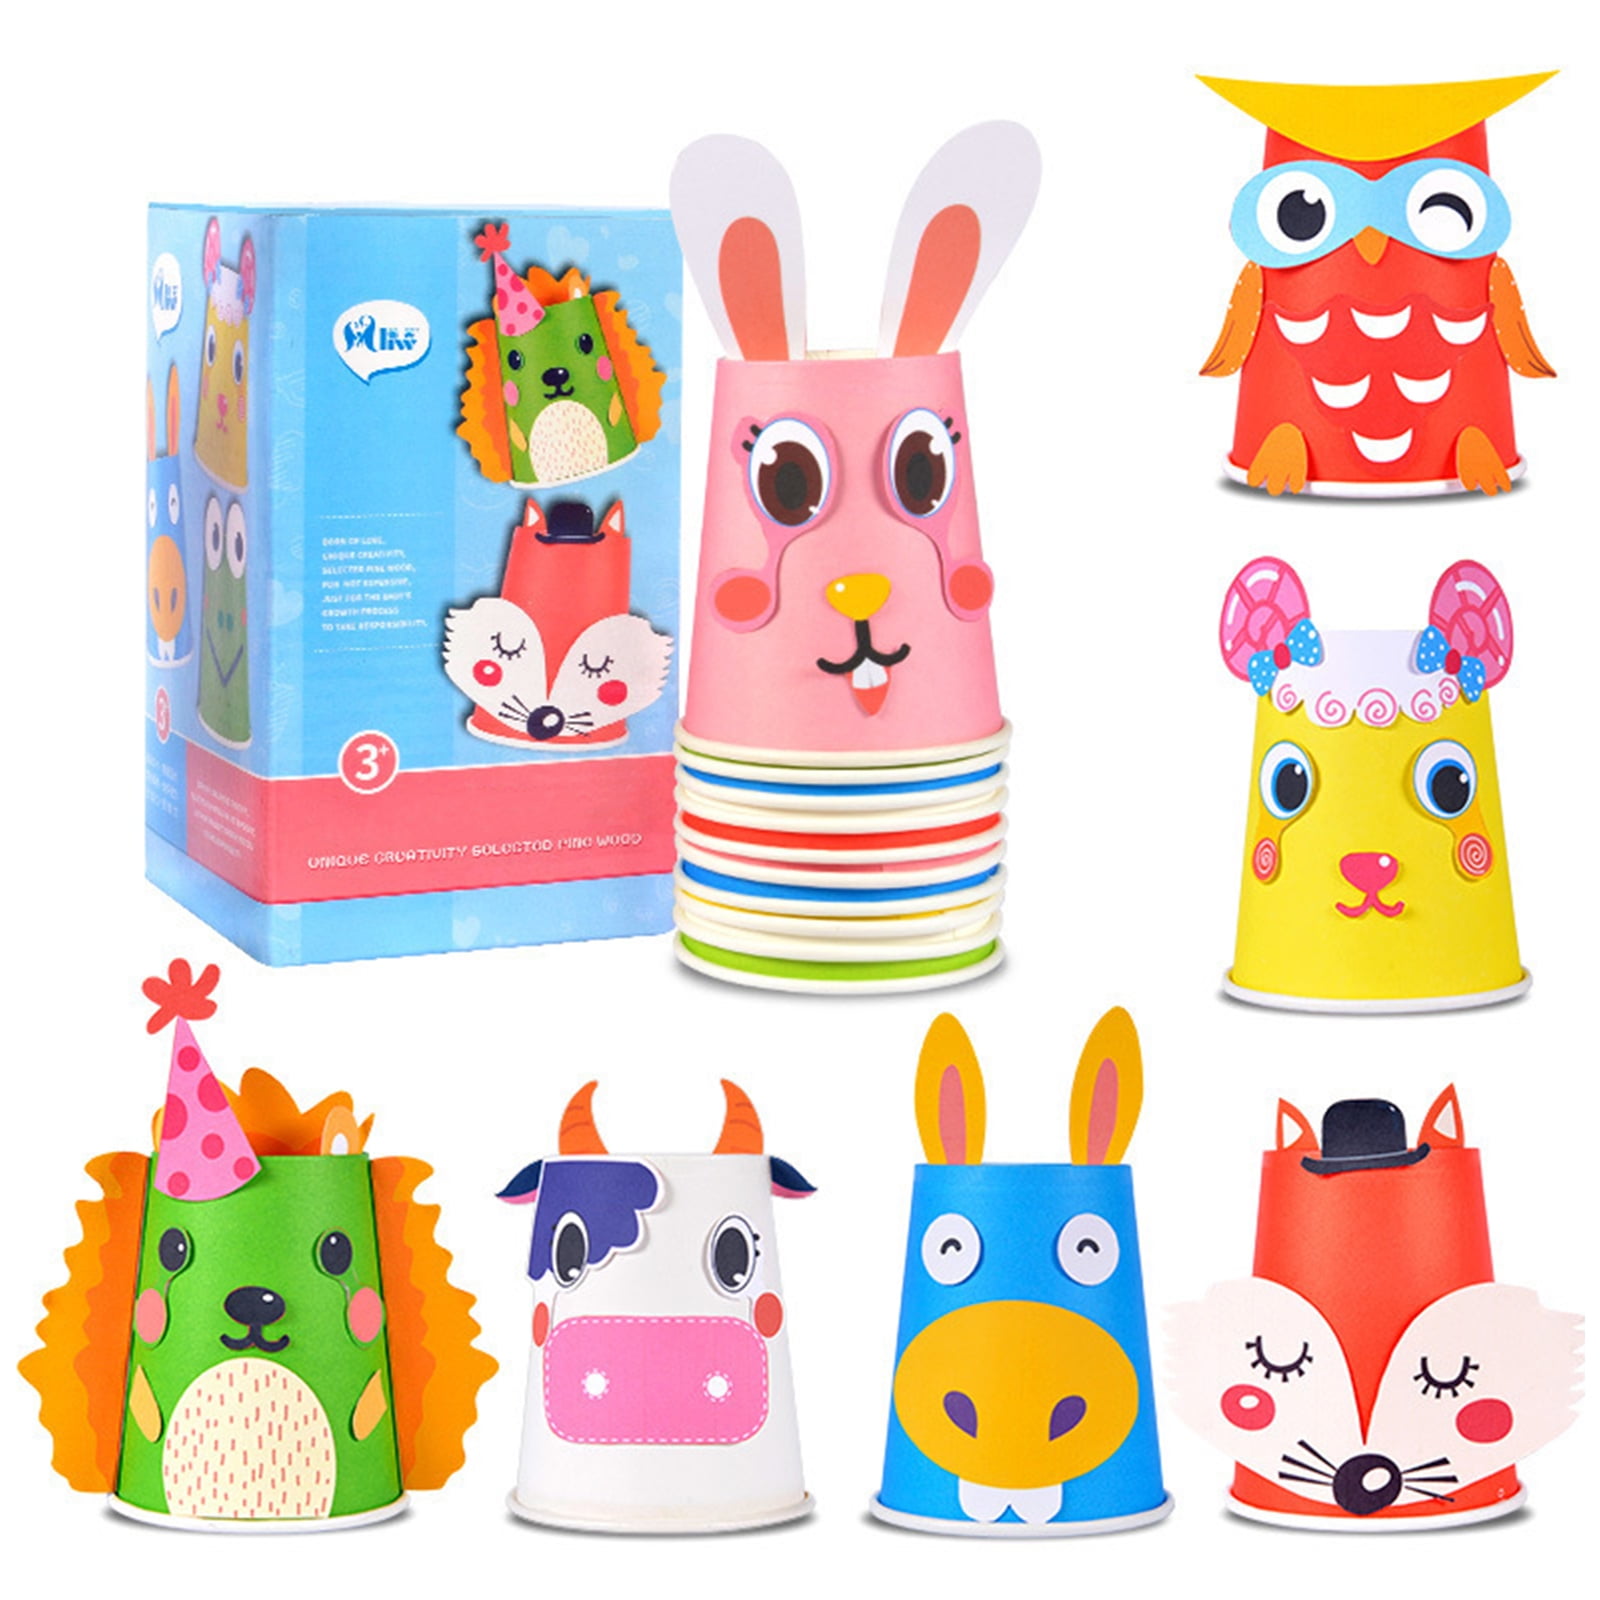 Lc crafts Art and crafts Kit for Kids Ages 8-12, create and Display  Animals, Kit Includes Supplies & Instruction, Best craft Project for K